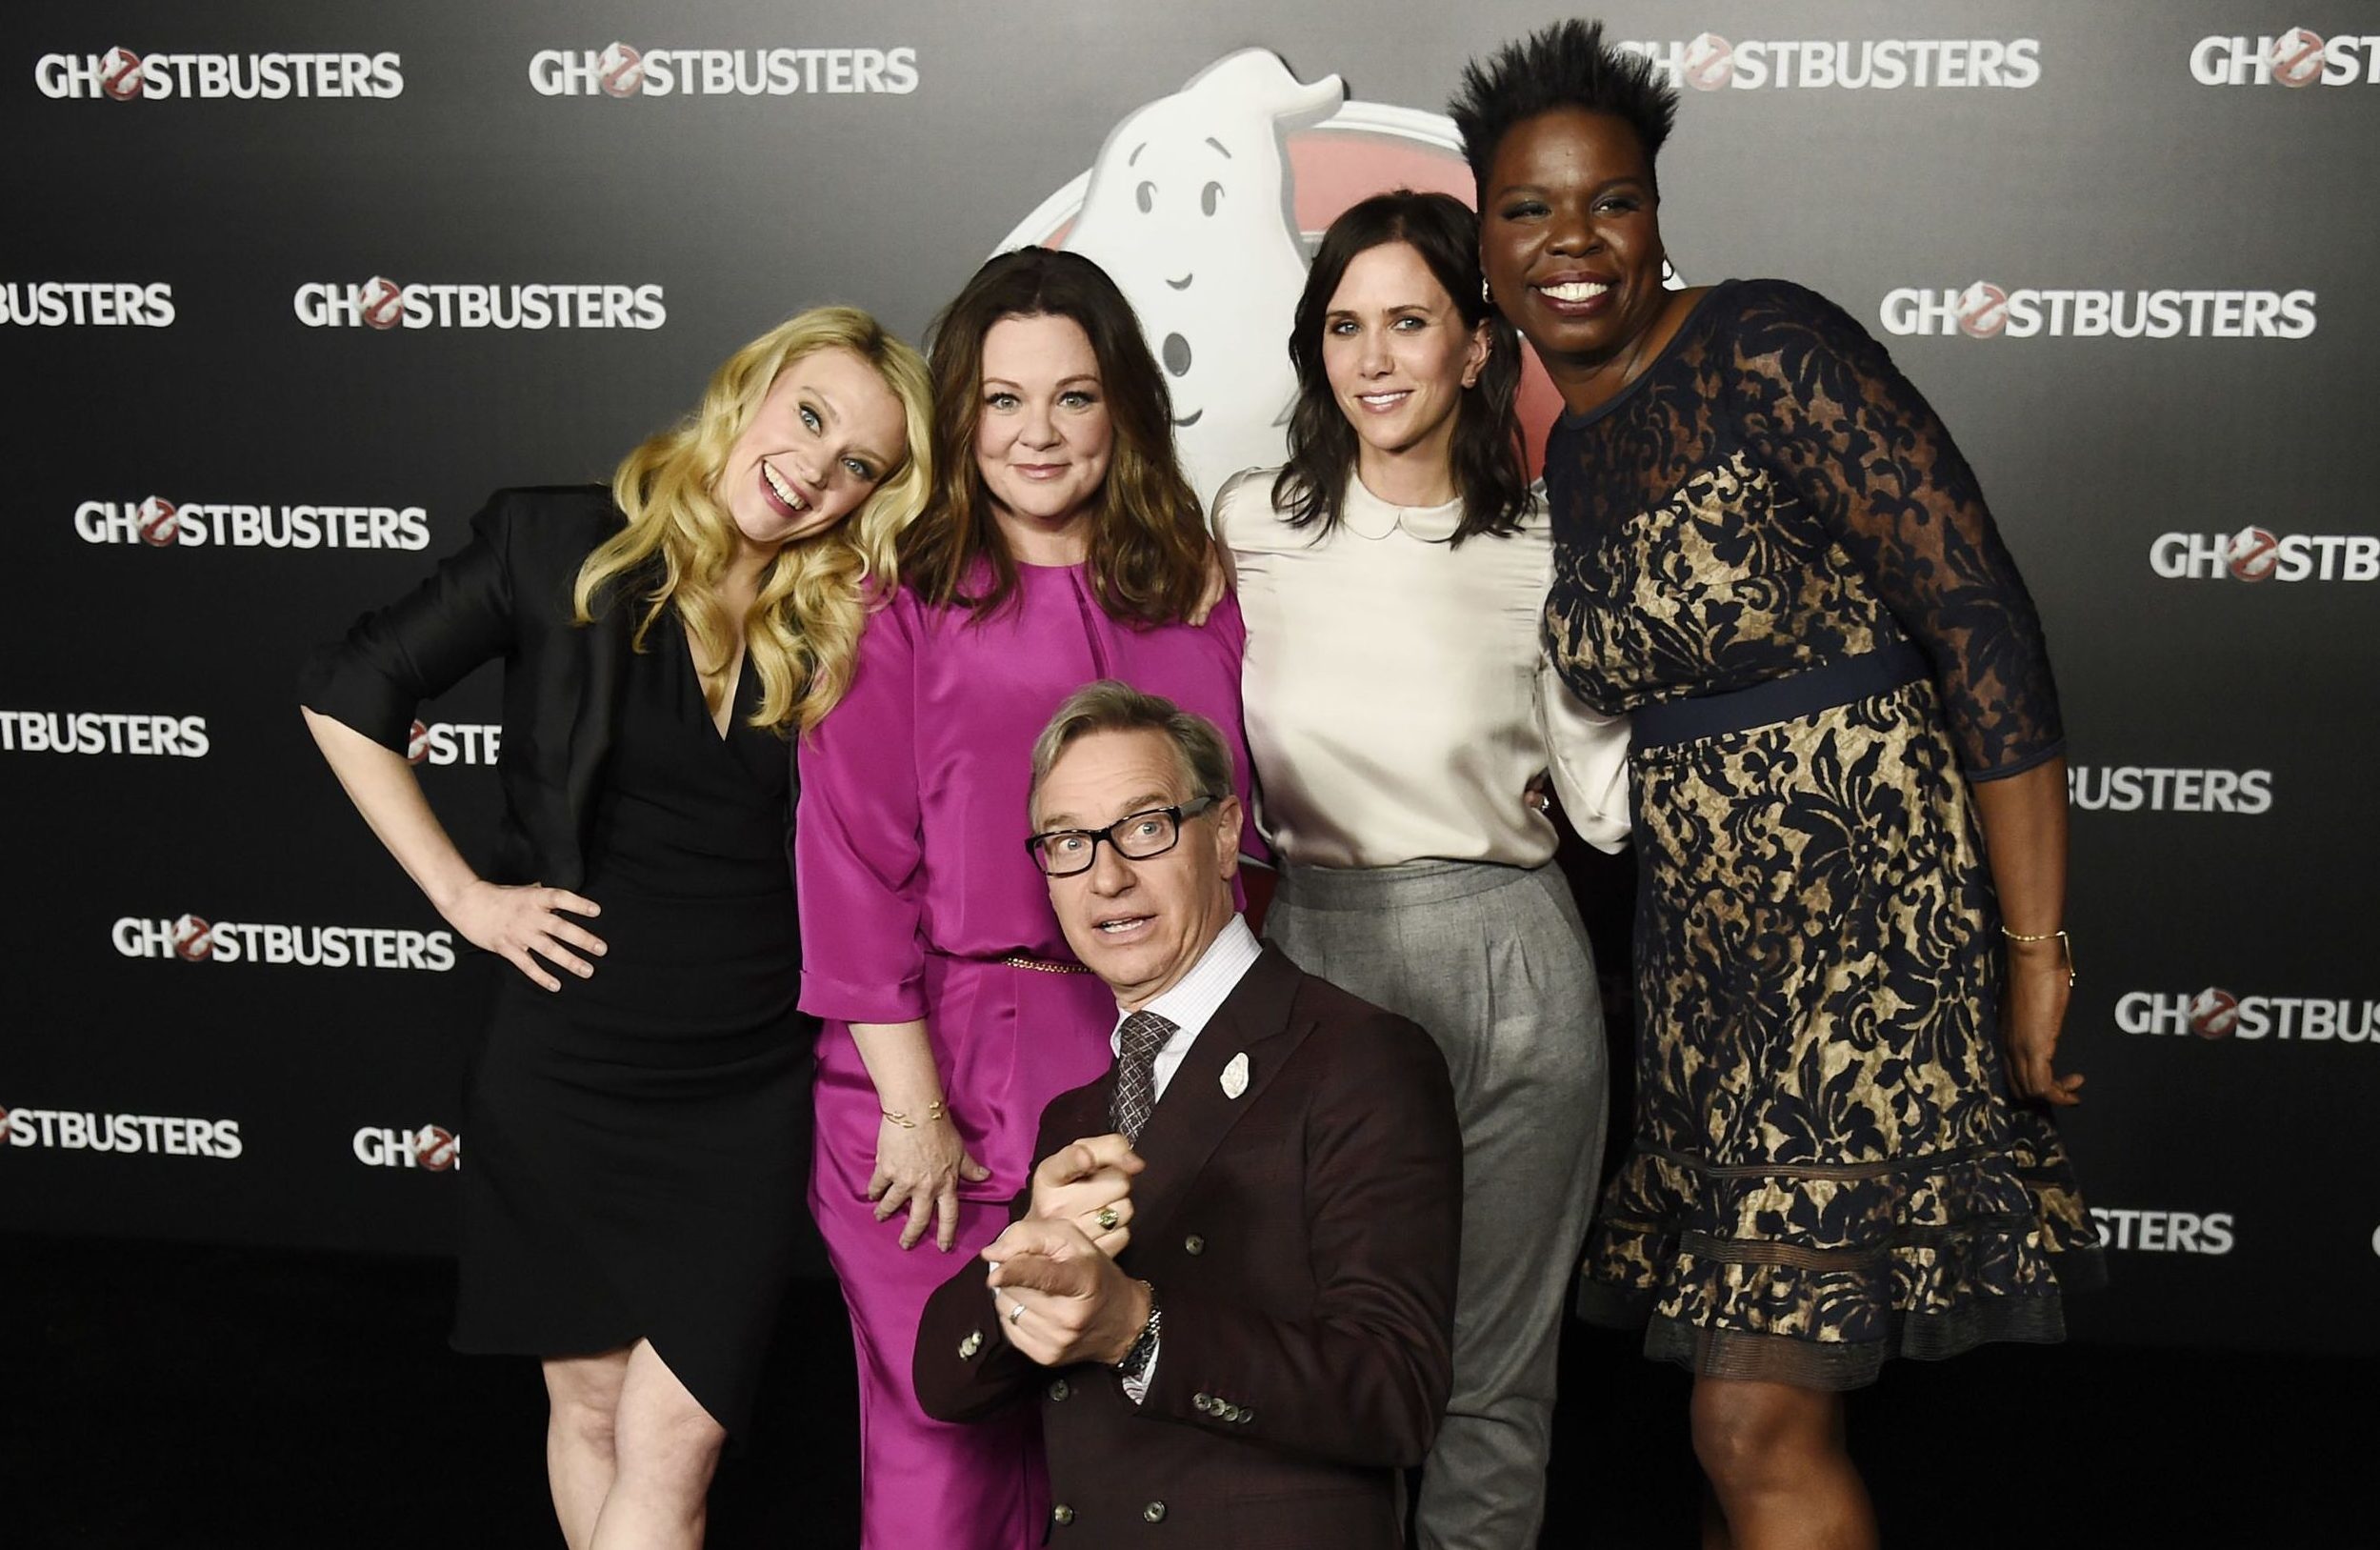 The cast of Ghostbusters with director Paul Feig.